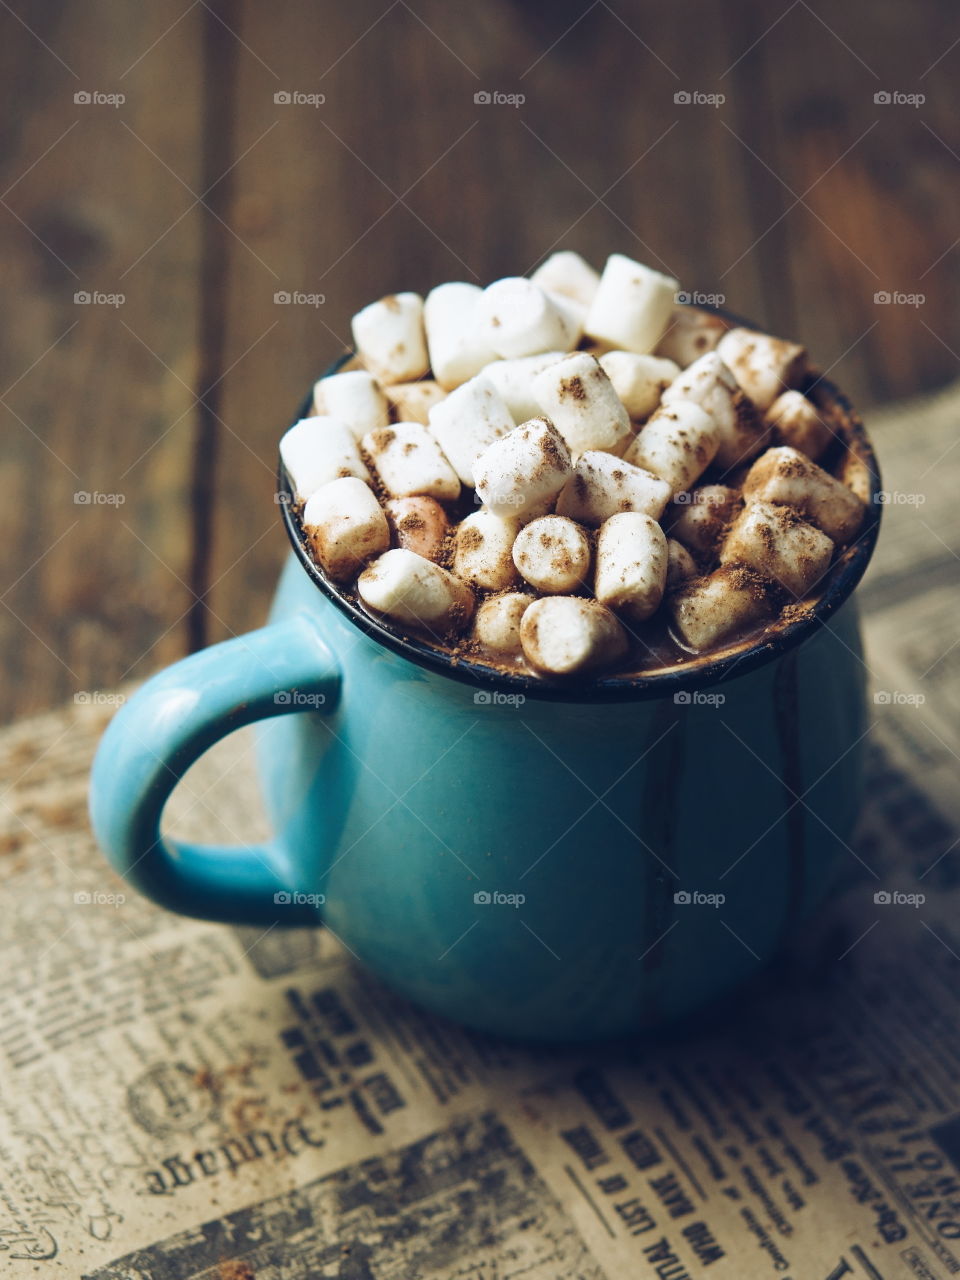 hot chocolate and marshmallow